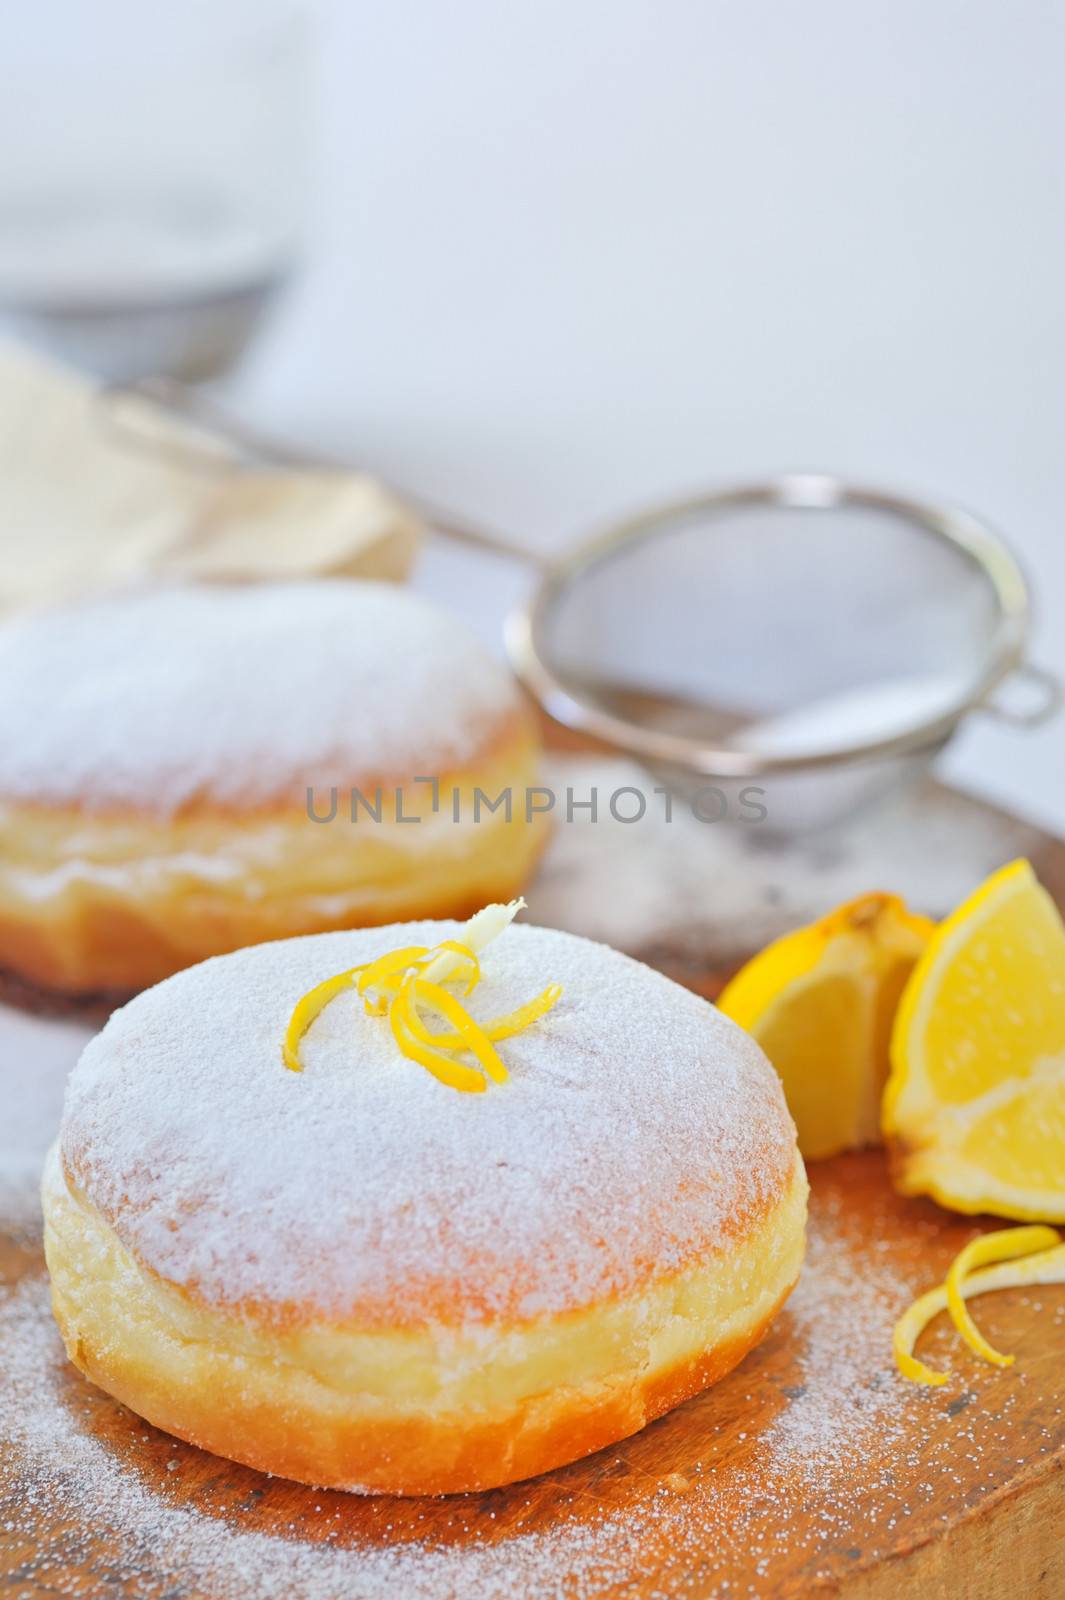 donut with lemon by mady70